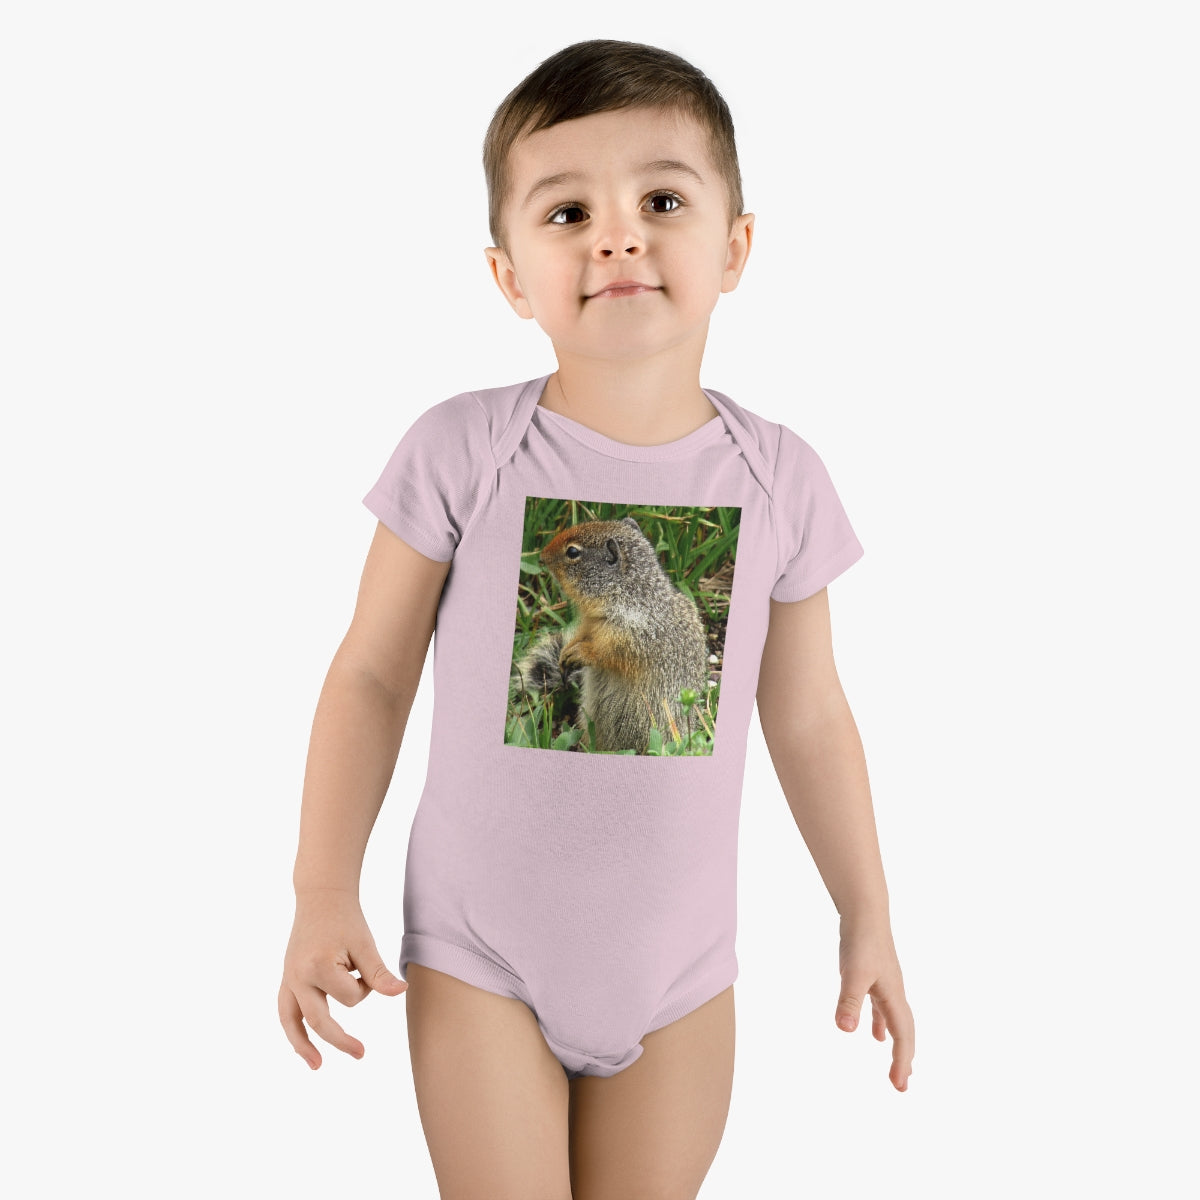 Inquisitive Stare - Baby Short Sleeve Onesie - Fry1Productions